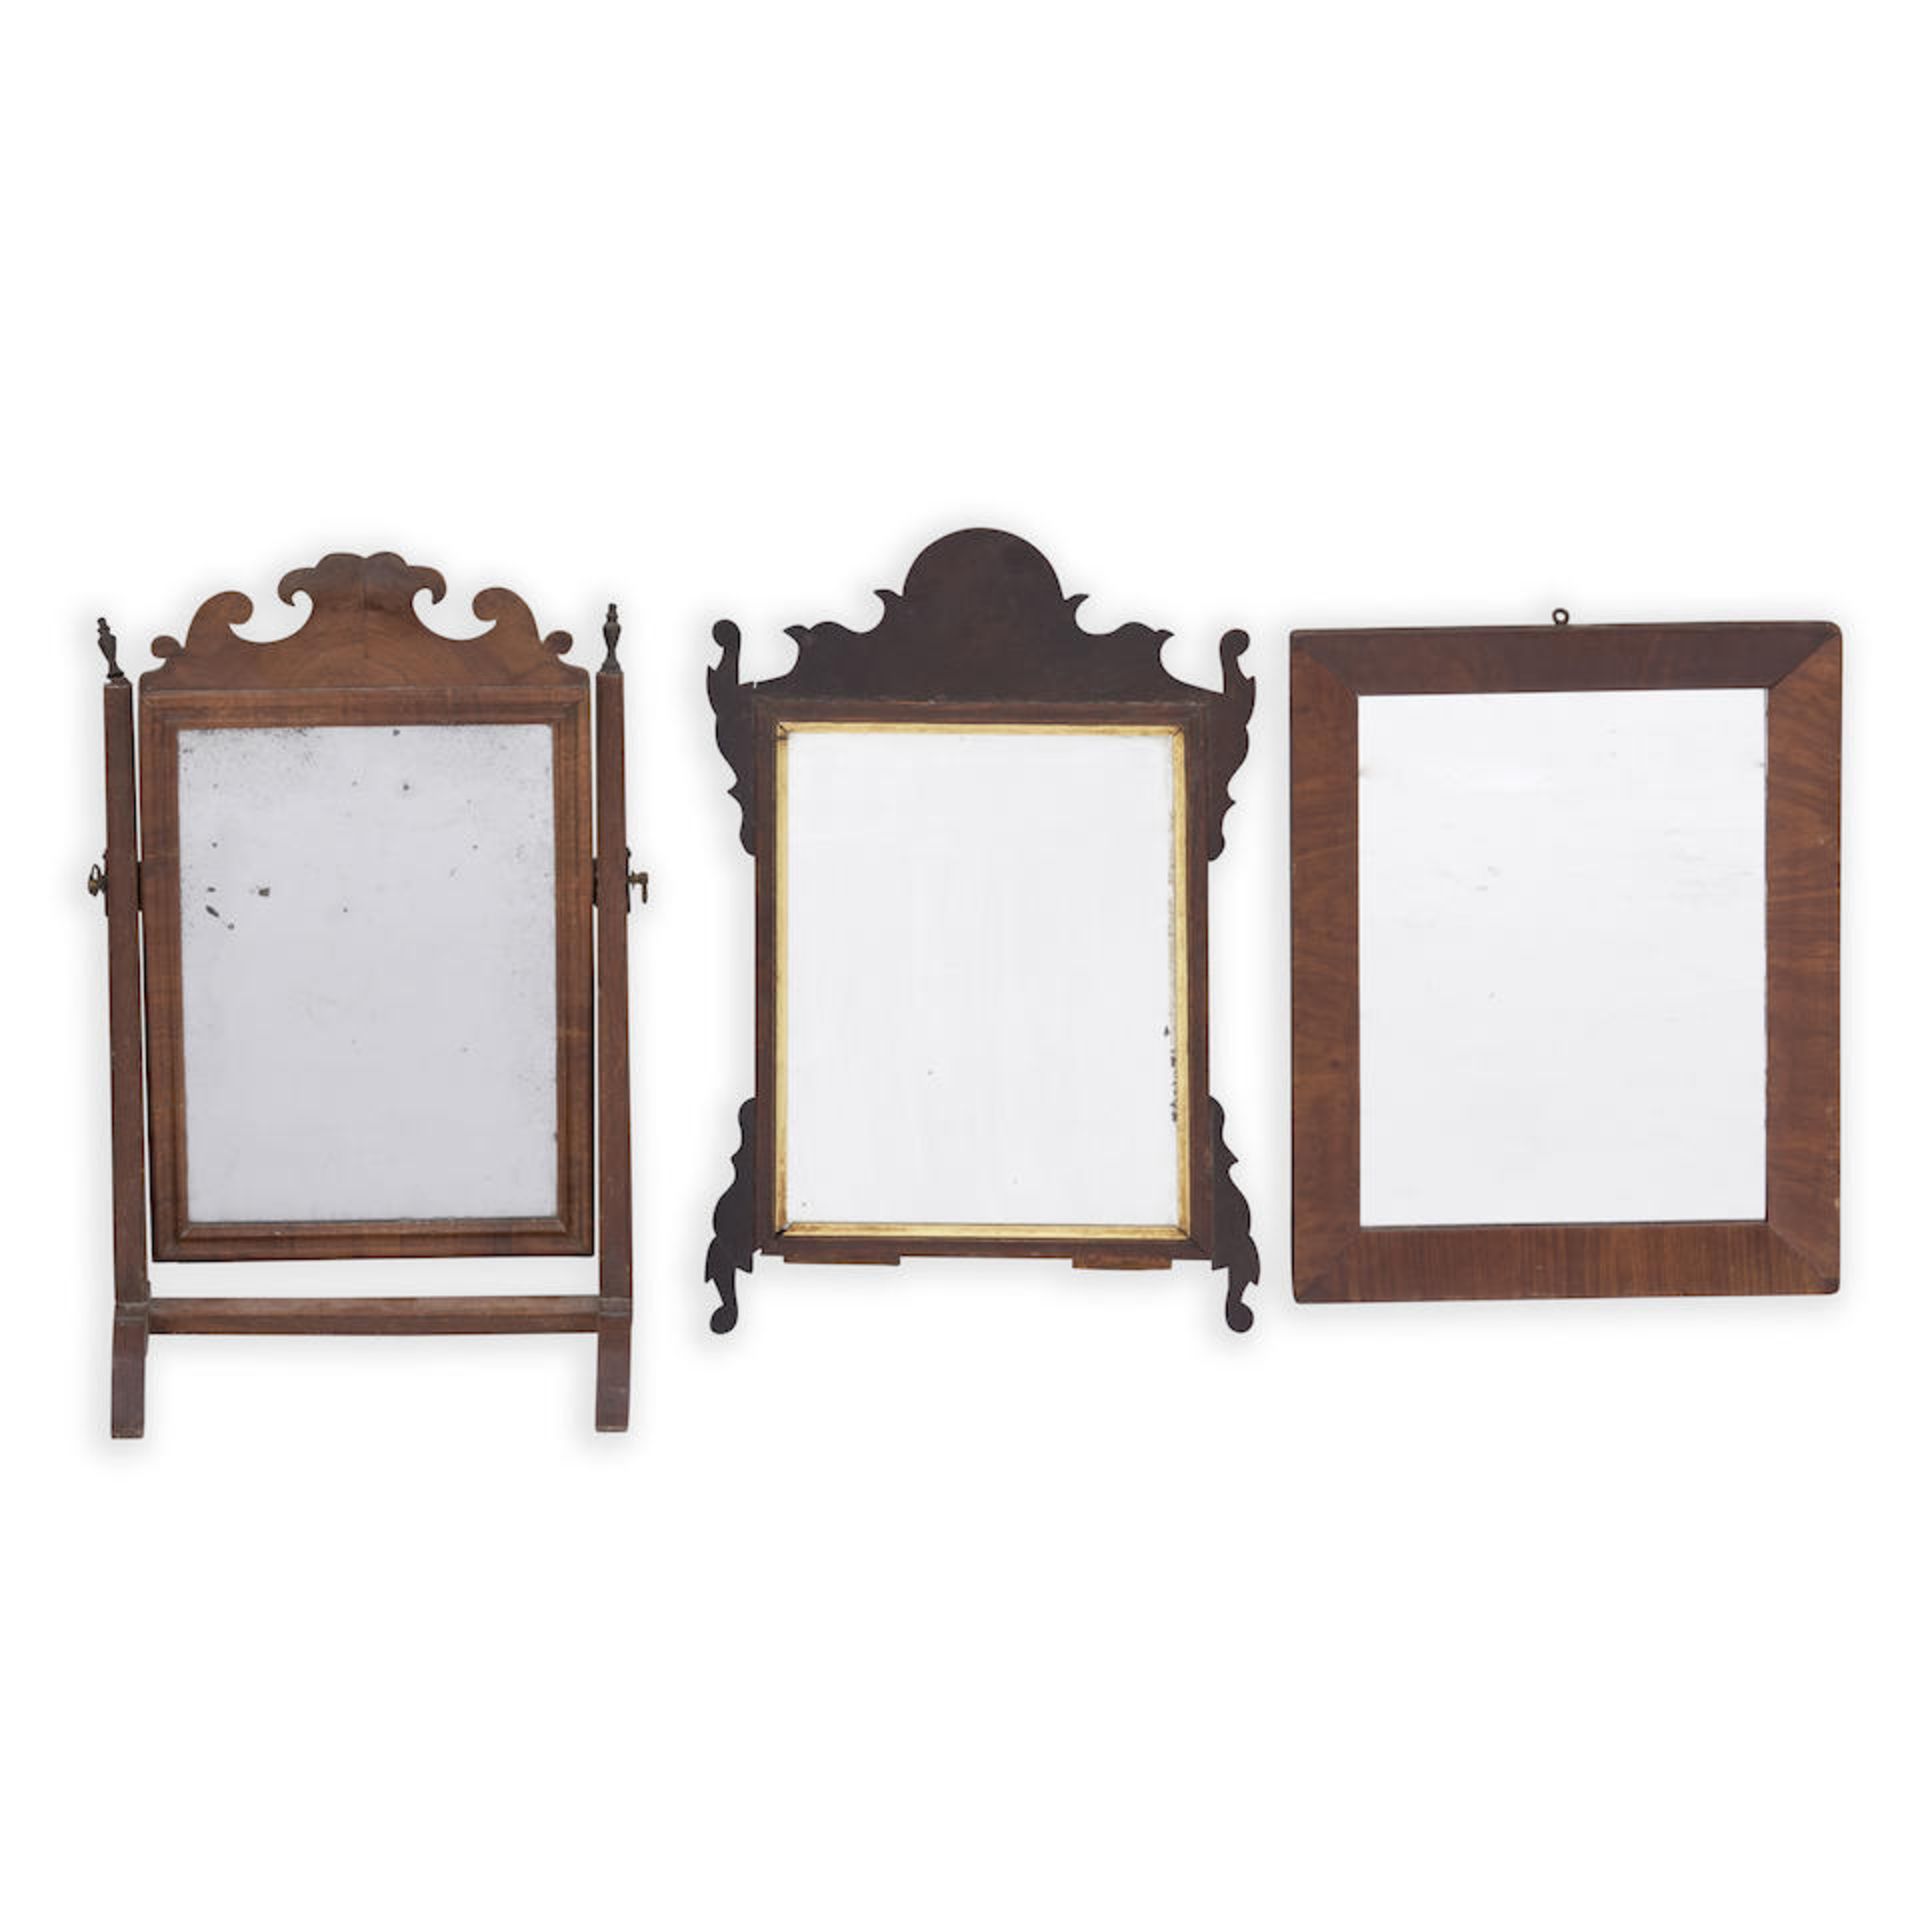 Two Wood Mirrors and A Small Dressing Mirror